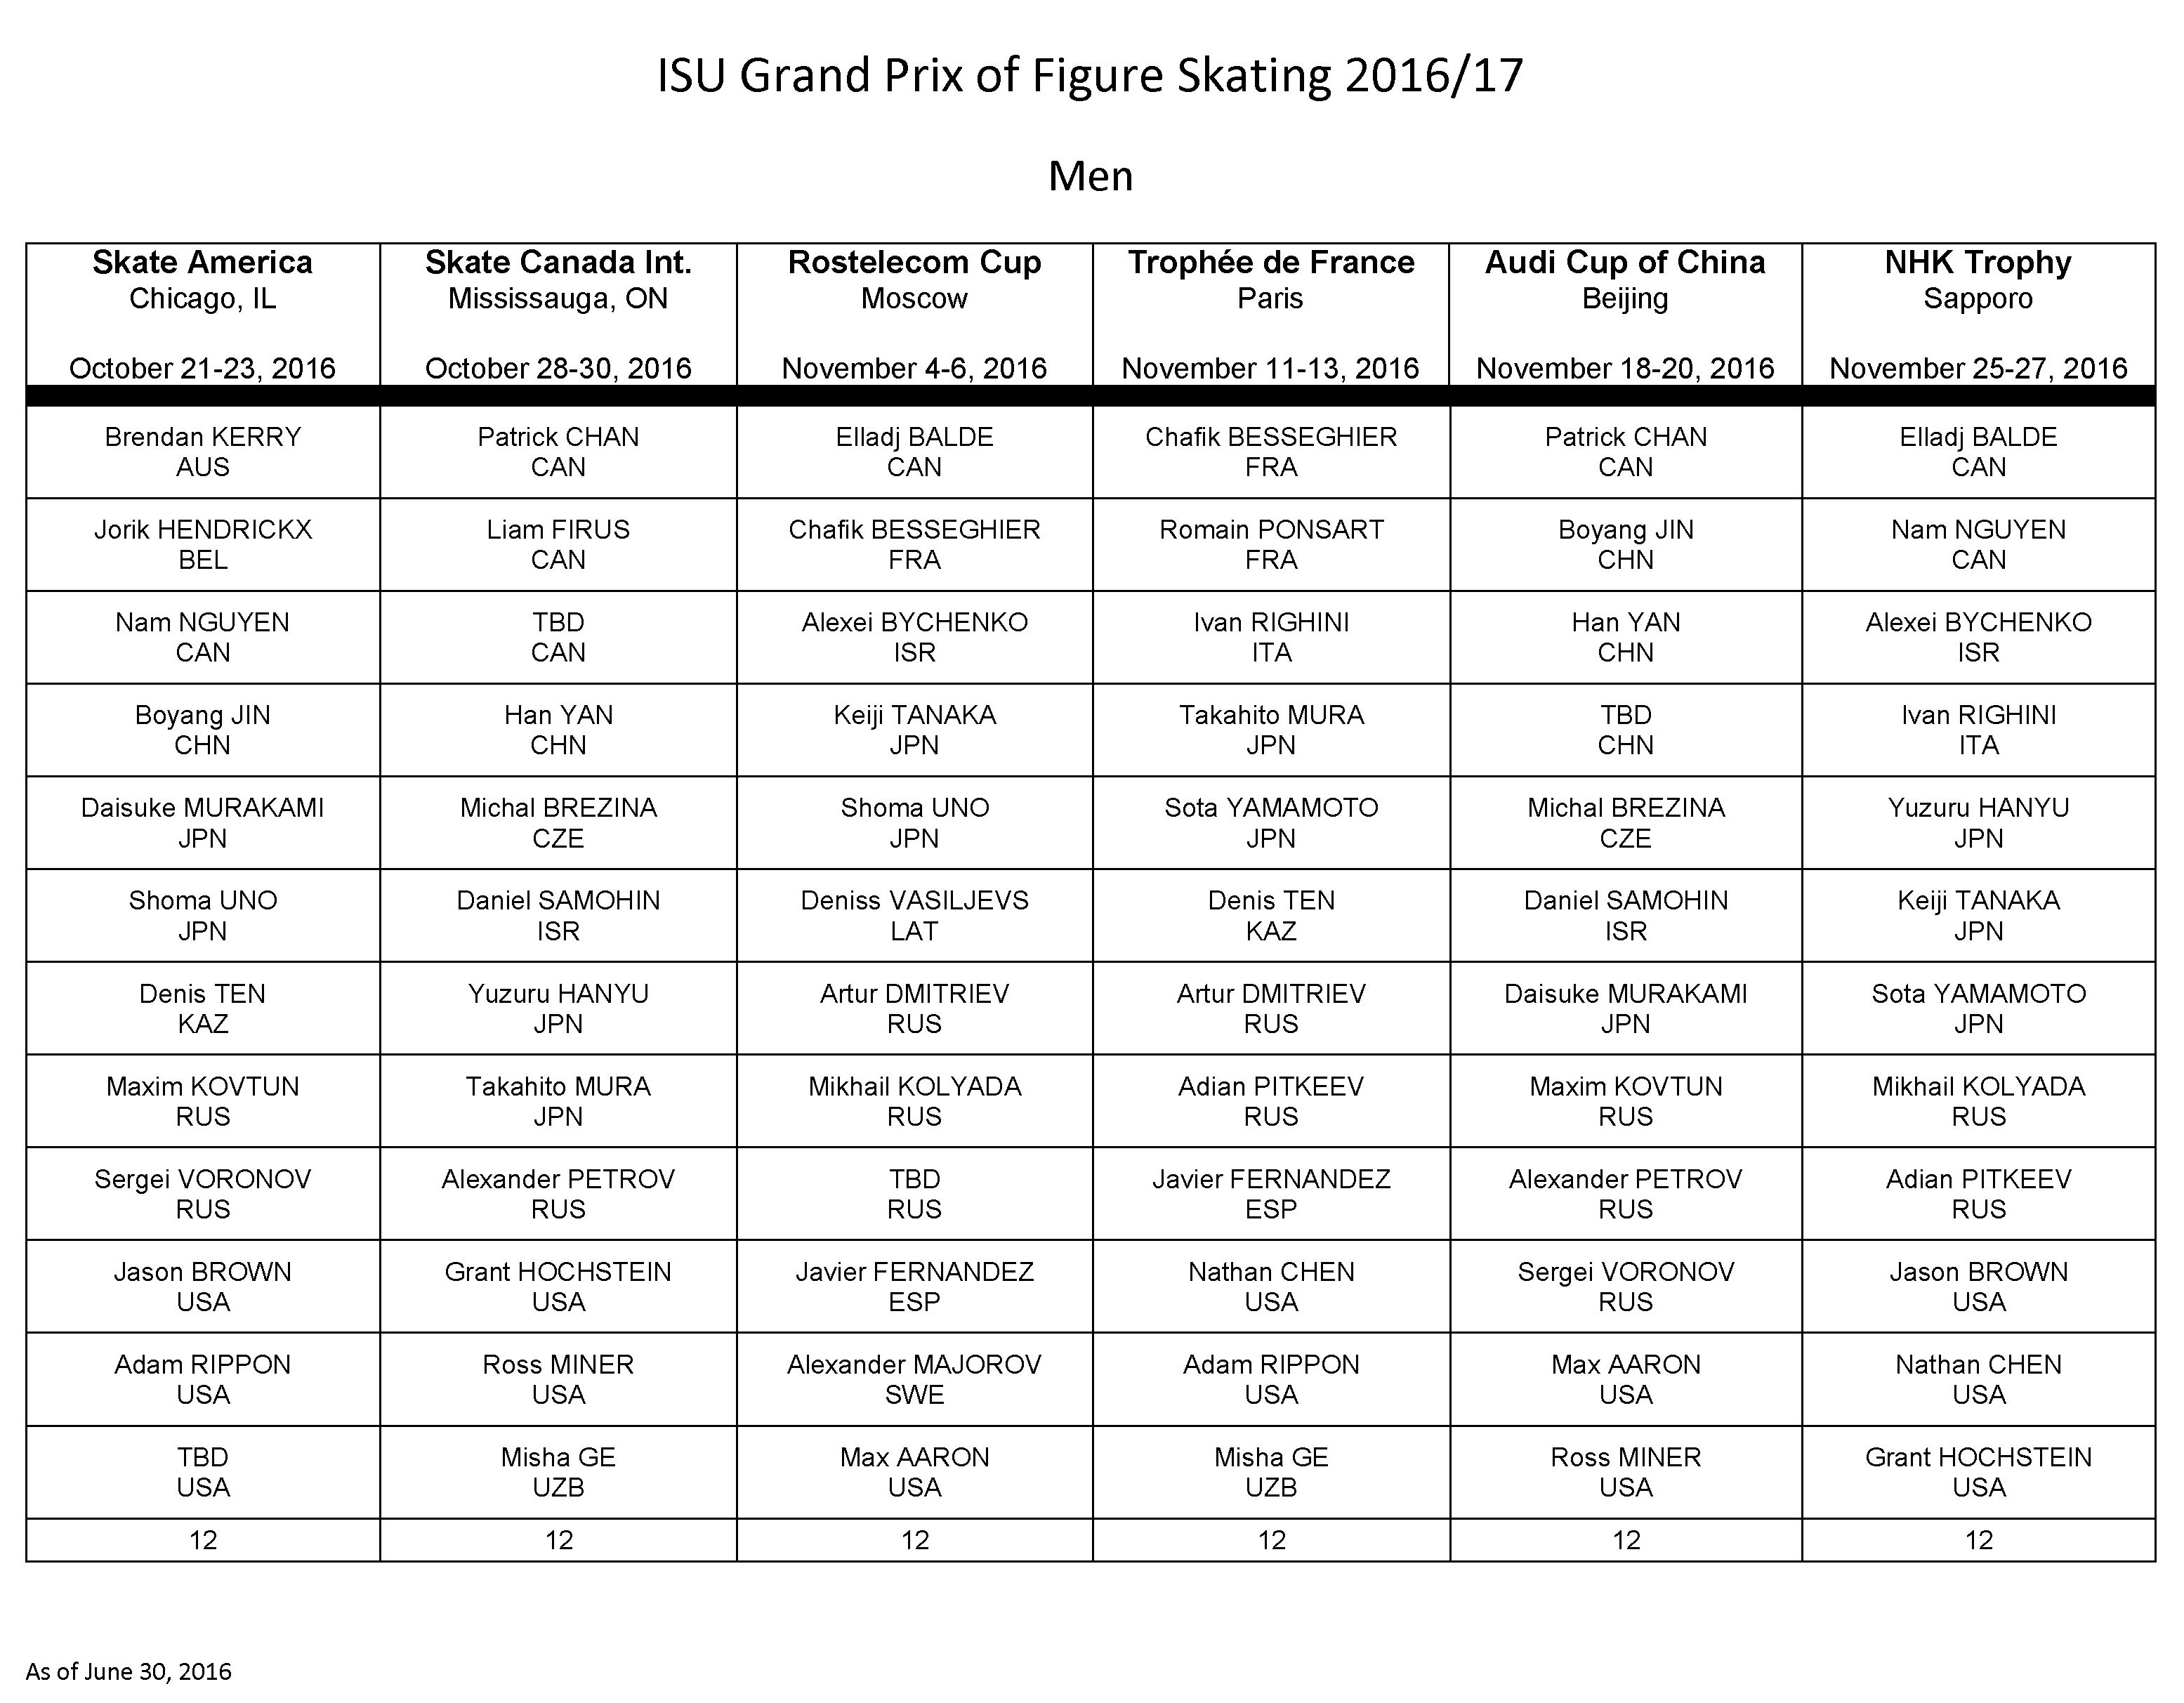 Table of mens entries to the ISU Grand Prix of Figure Skating 2016-2017.